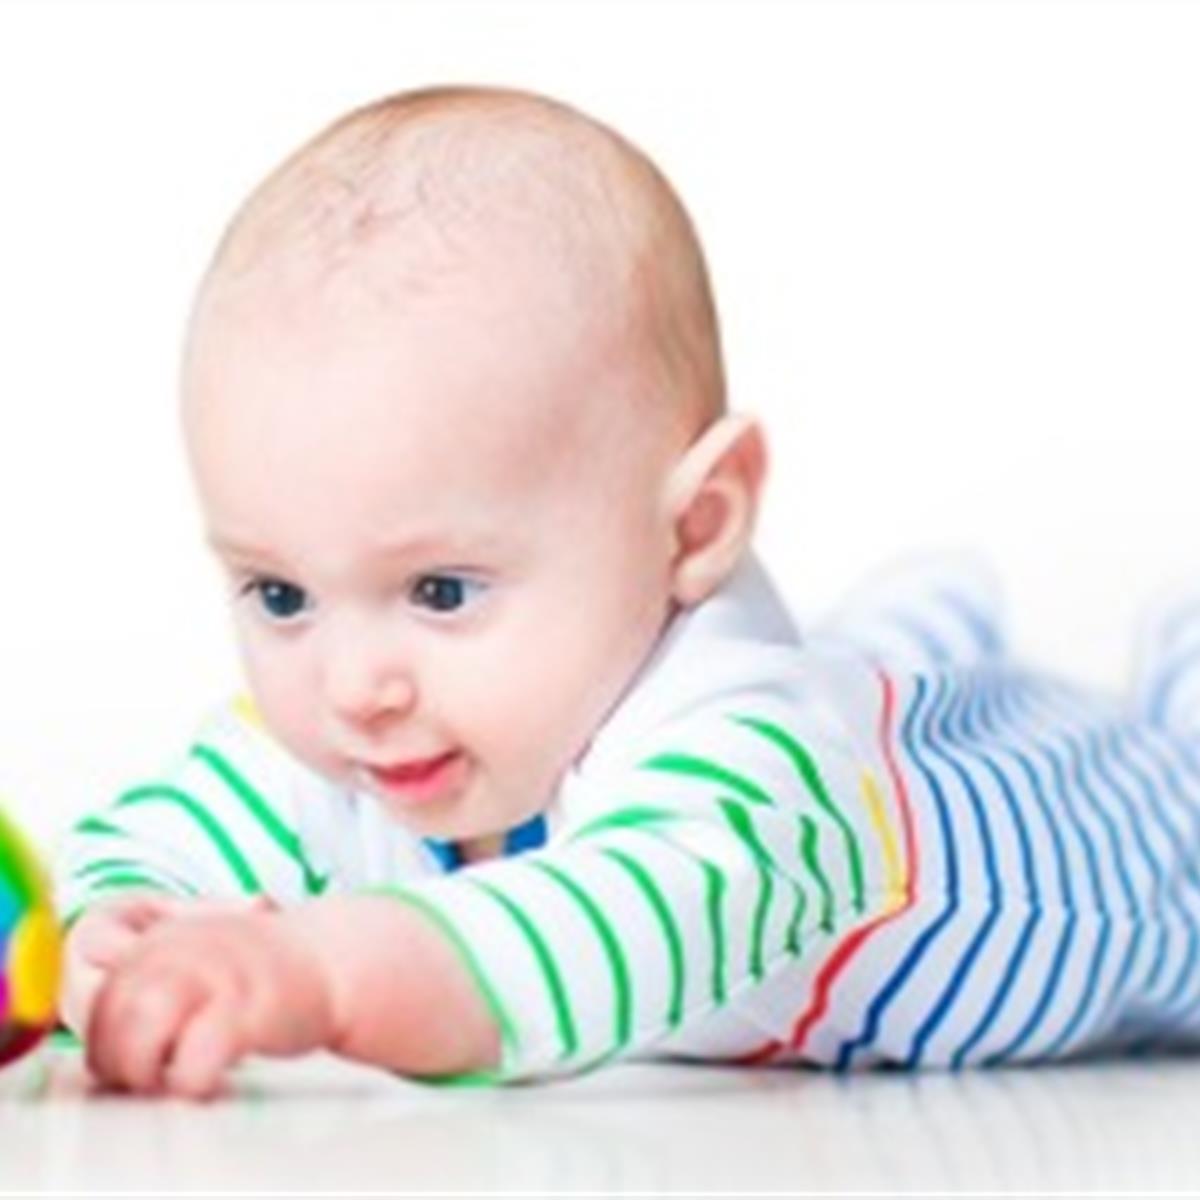 Baby Safety Month: Top Tips for Ensuring Infant Safety